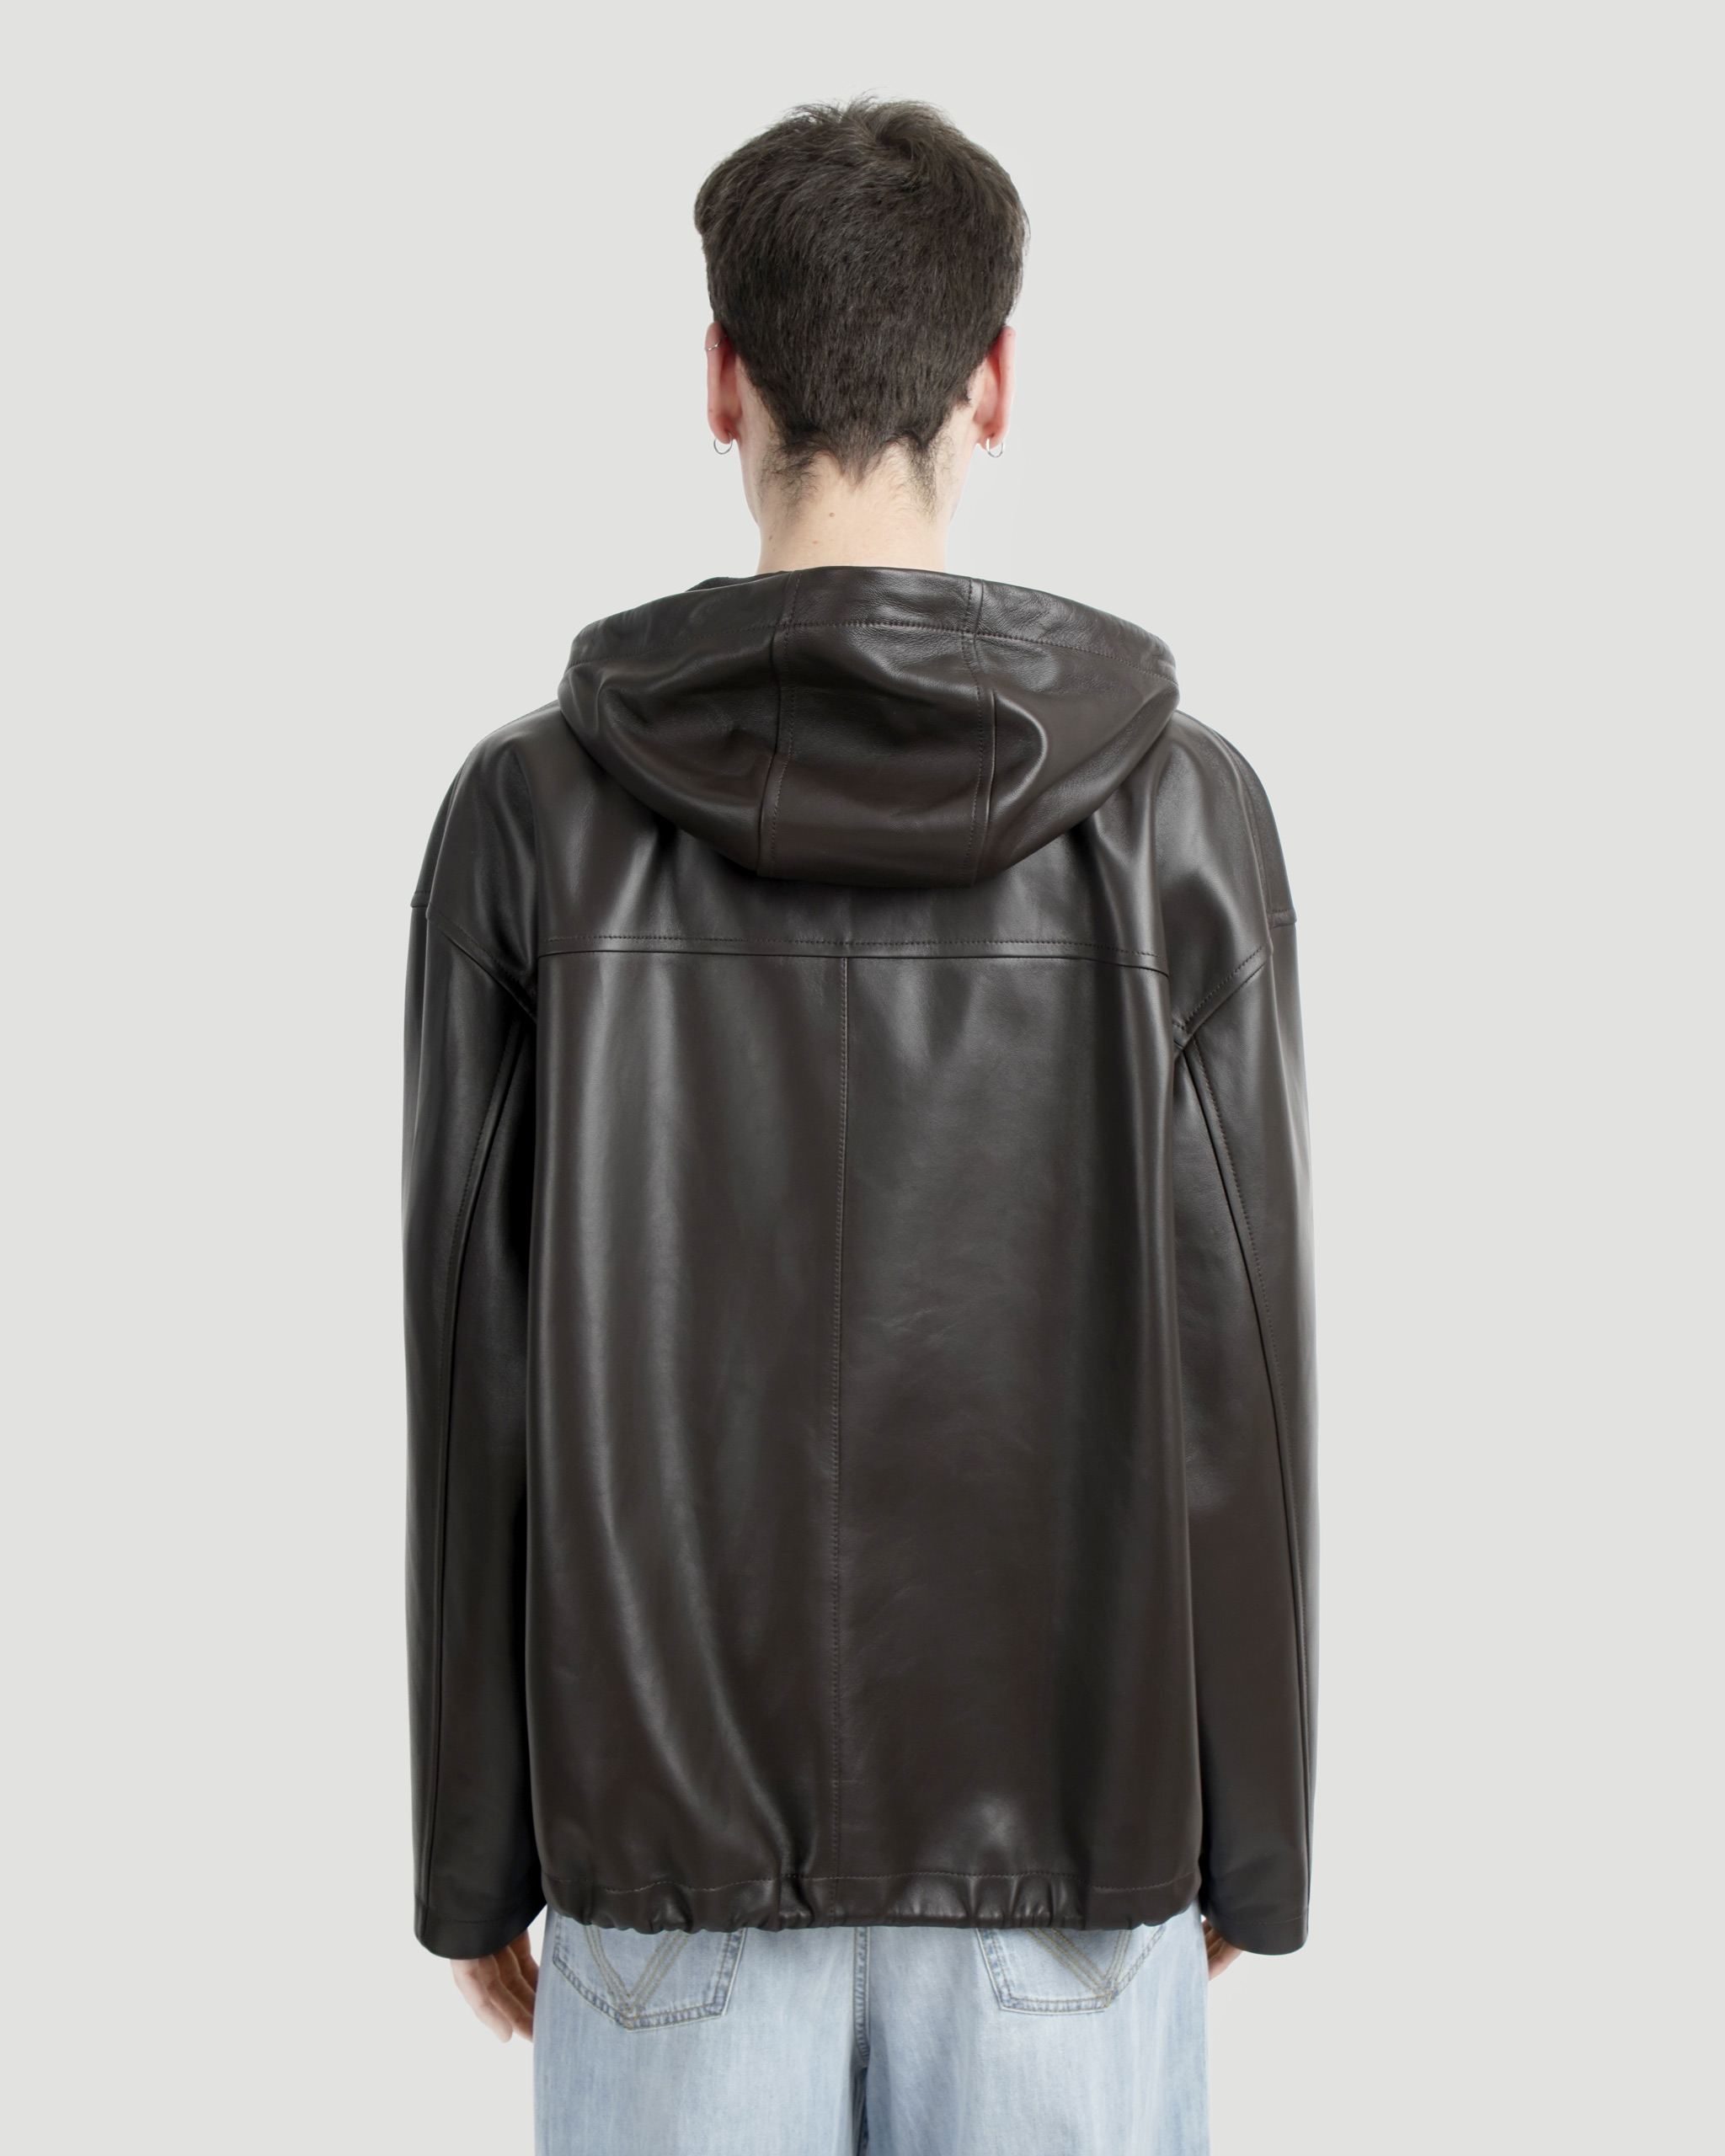 BROWN LEATHER JACKET WITH A HOOD - All-U-Re